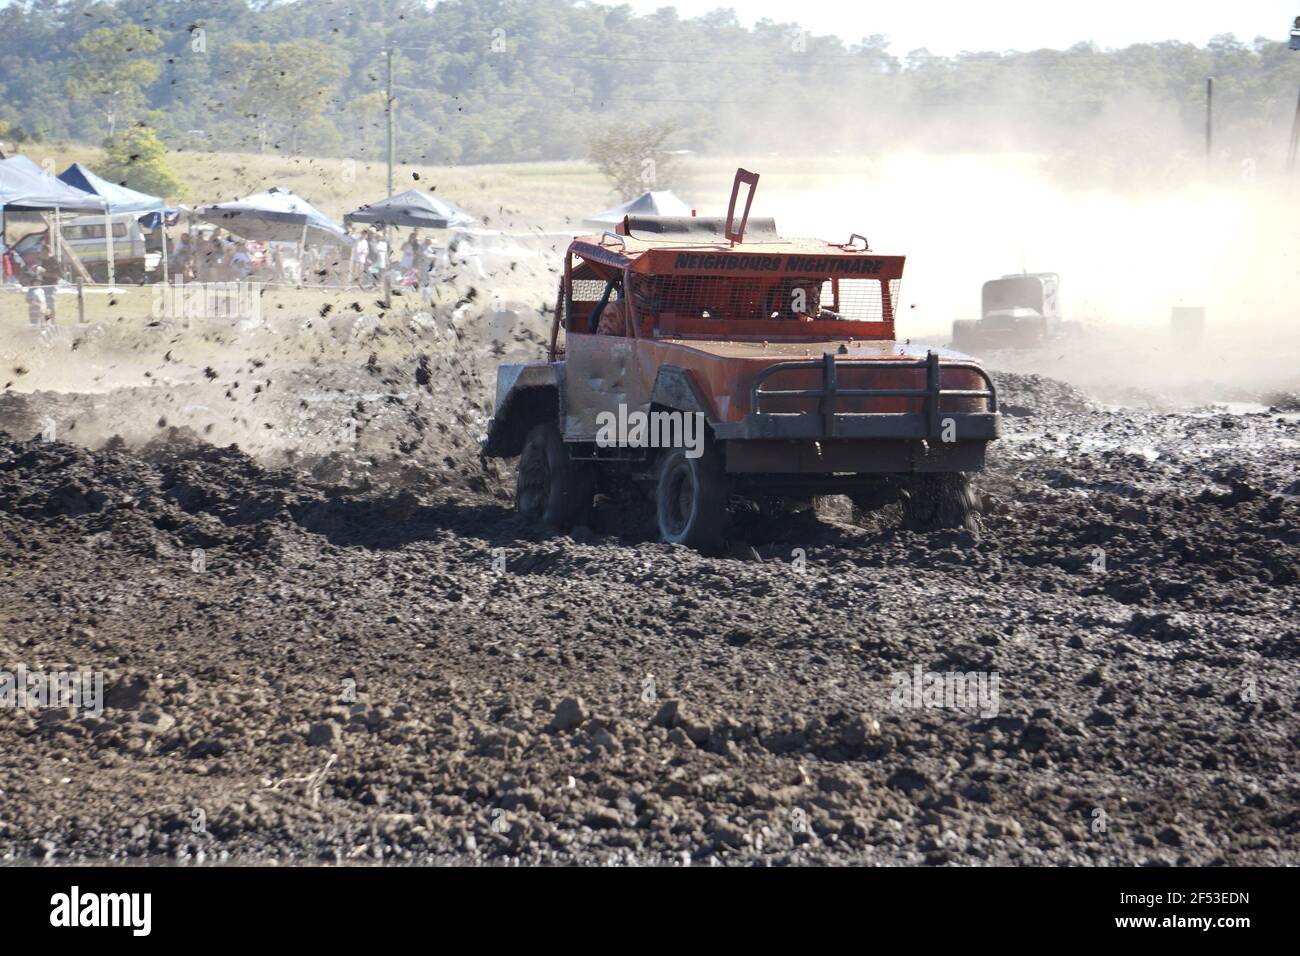 A dented old utility truck taking part in a mud race with everything including the driver covered in dirt and mud. Stock Photo